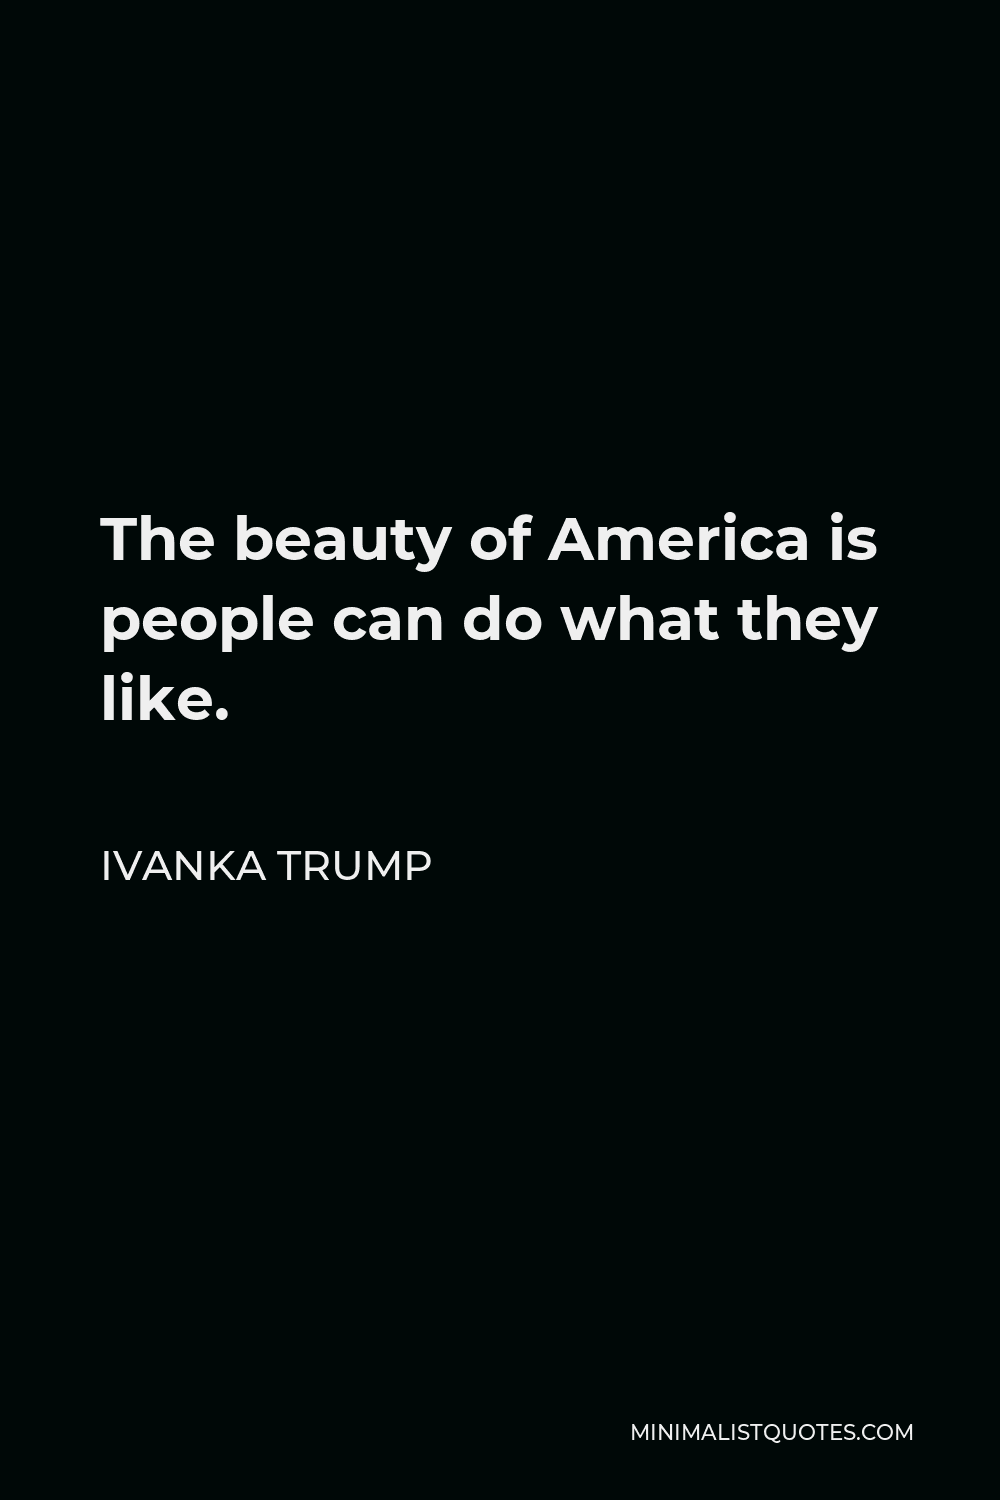 Ivanka Trump Quote - The beauty of America is people can do what they like.